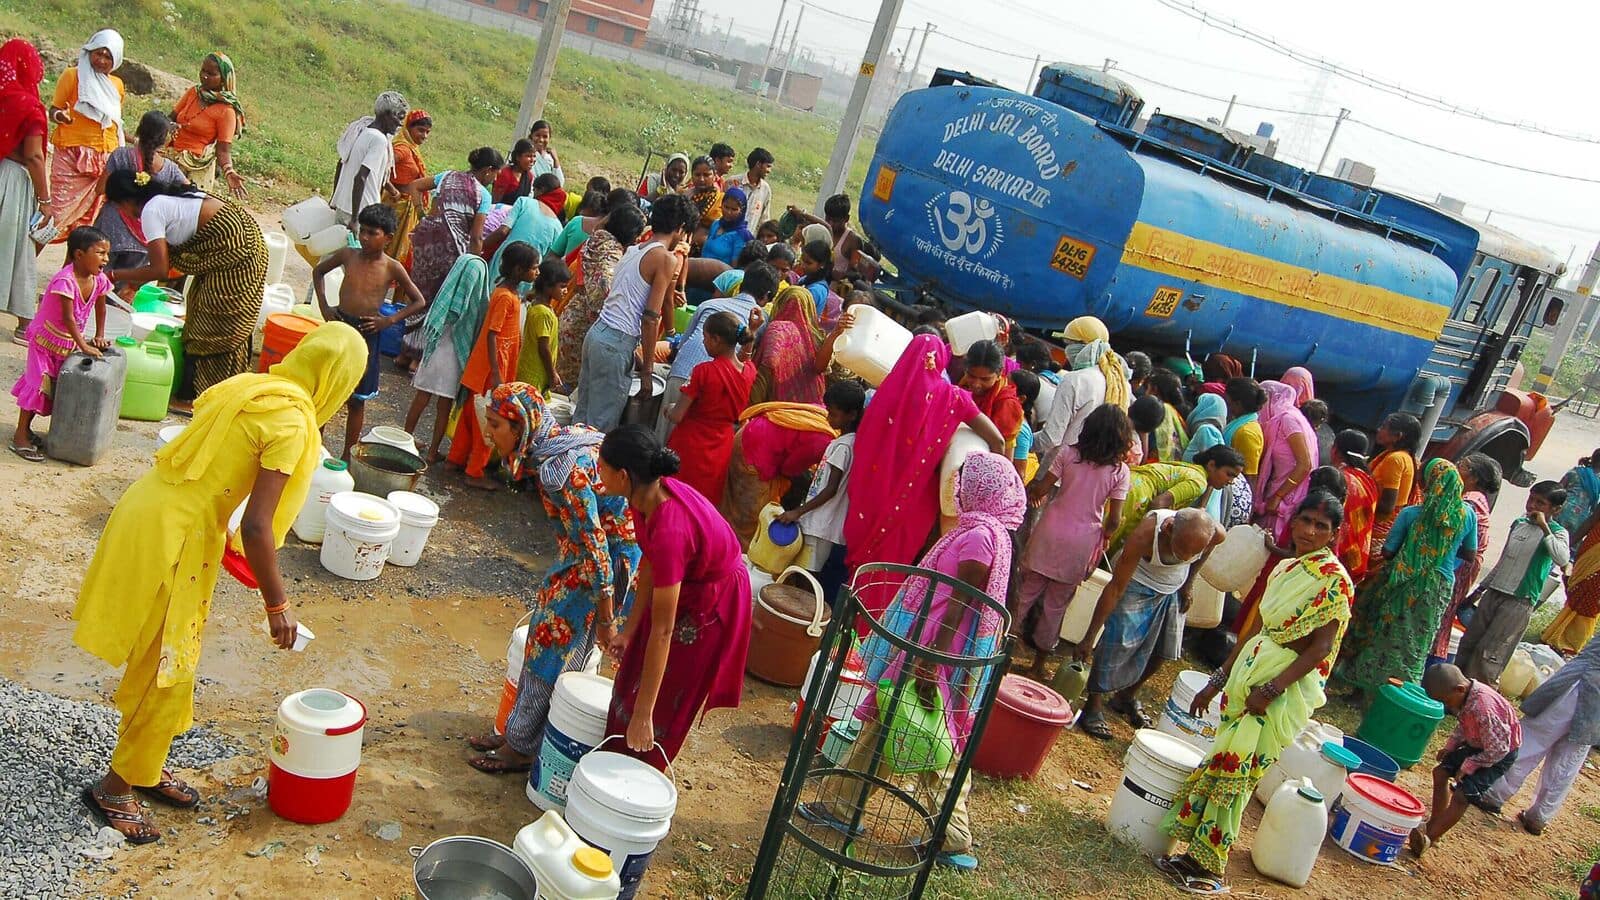 &lsquo;Only 3% households drink piped water&rsquo;The survey that received over 26,000 responses at a pan-India level shows that supply of piped water t...